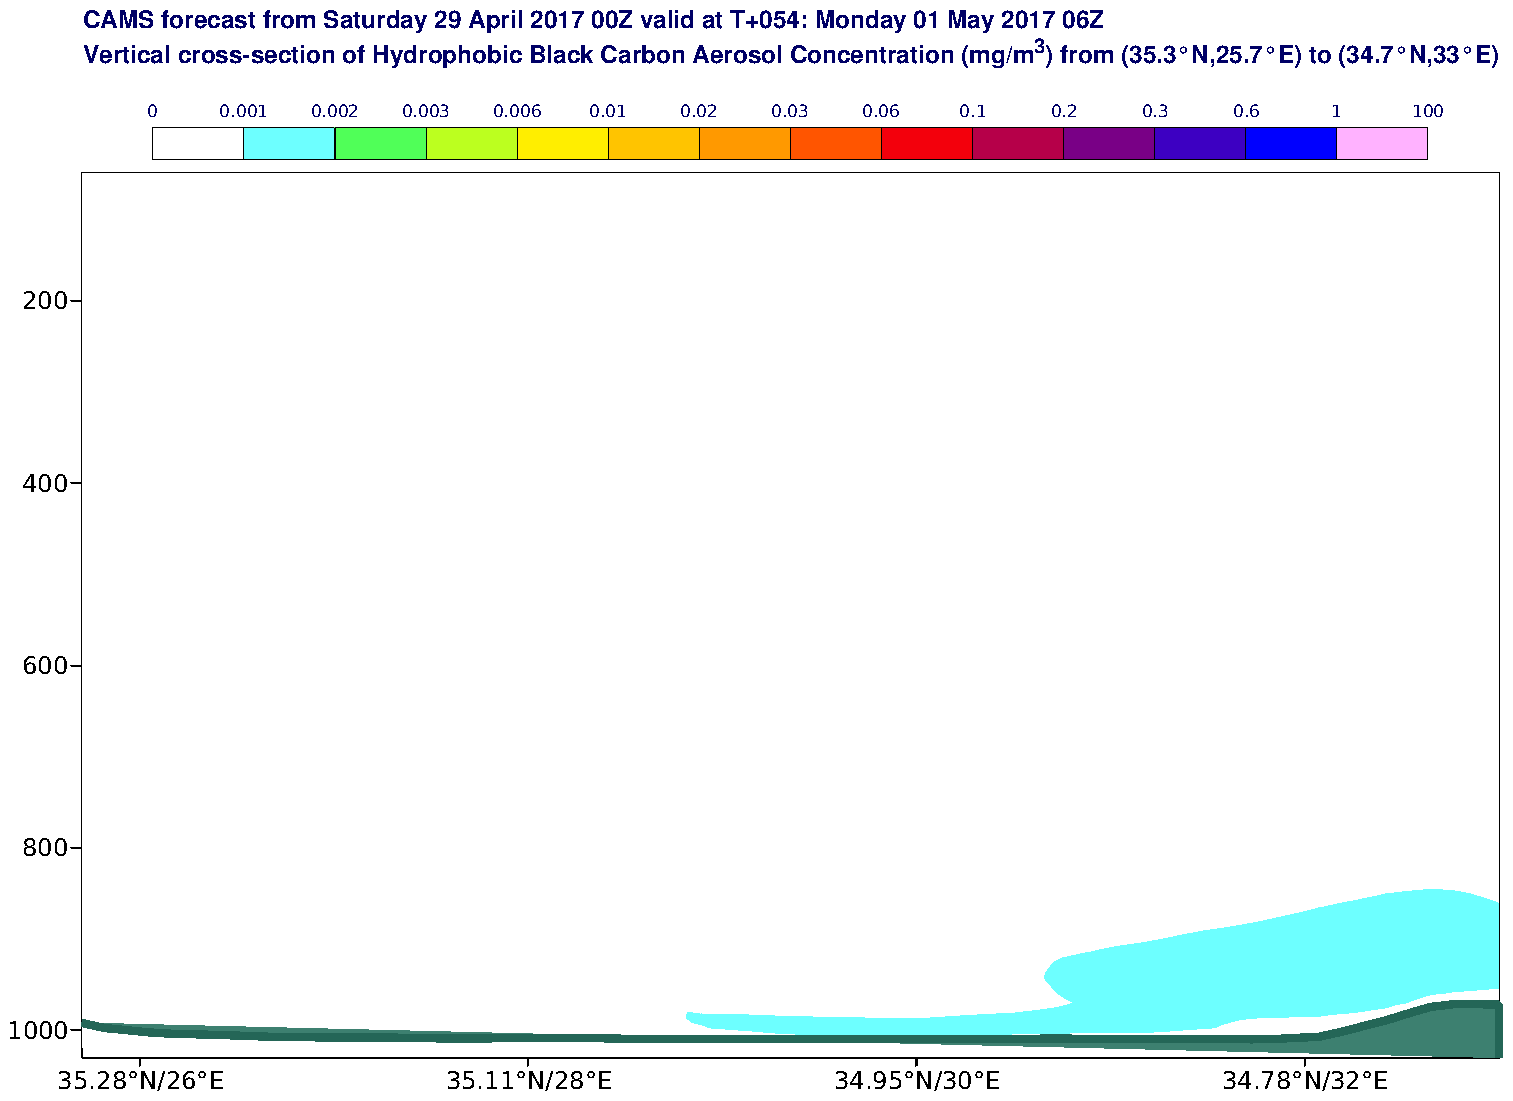 Vertical cross-section of Hydrophobic Black Carbon Aerosol Concentration (mg/m3) valid at T54 - 2017-05-01 06:00